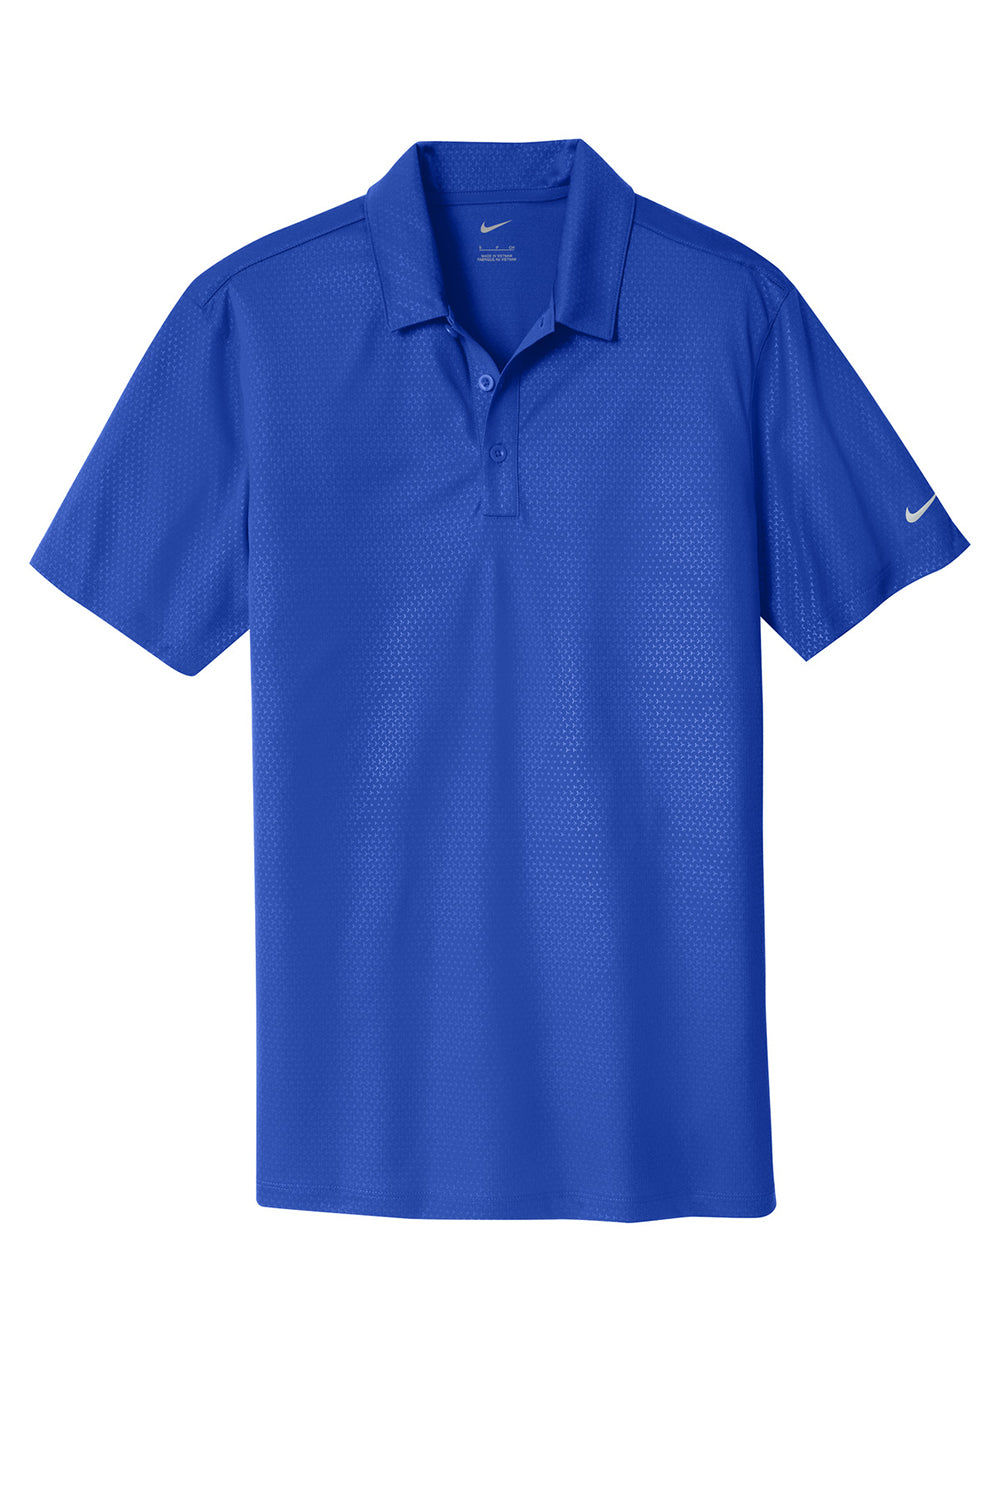 Nike 838964 Mens Dri-Fit Moisture Wicking Short Sleeve Polo Shirt Old Royal Blue Flat Front